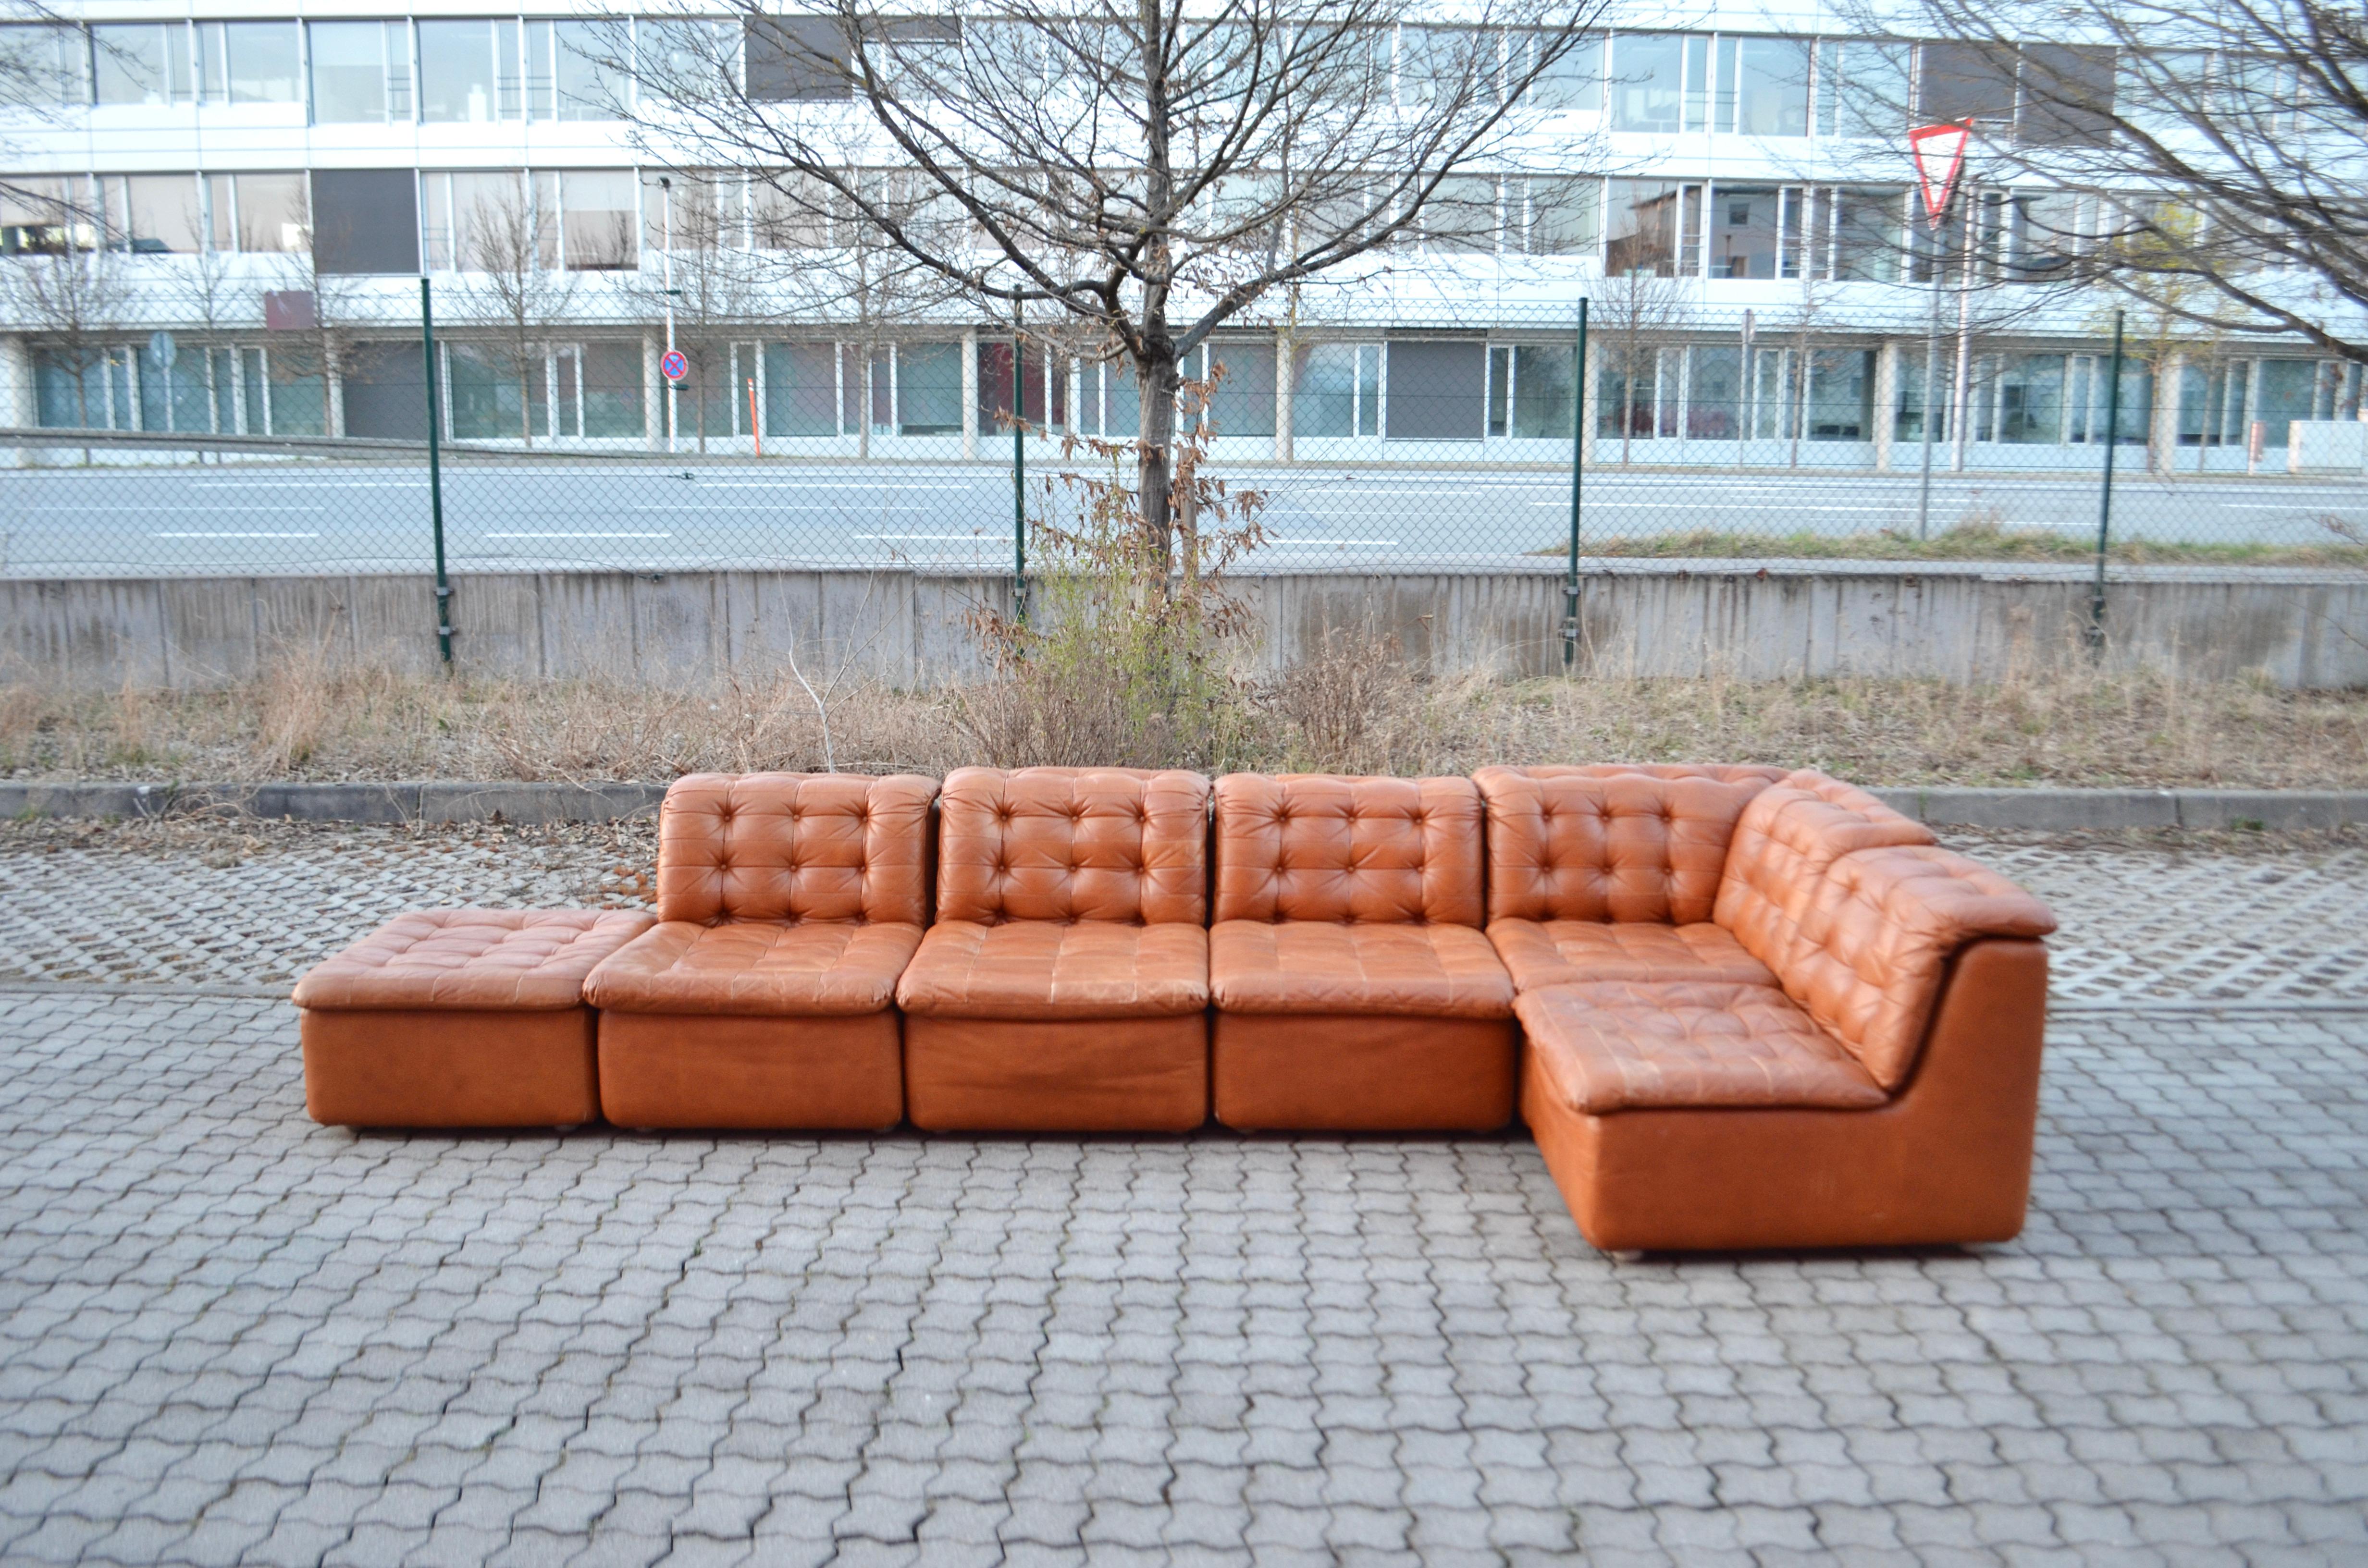 This stunning Modular sectional leather sofa is manufactured in Germany.
It is a high quality manufactured seating group.
The producer is yet unknown.
It is a pure 70ties design with timeless modern shape.
The leather is a beautiful brandy